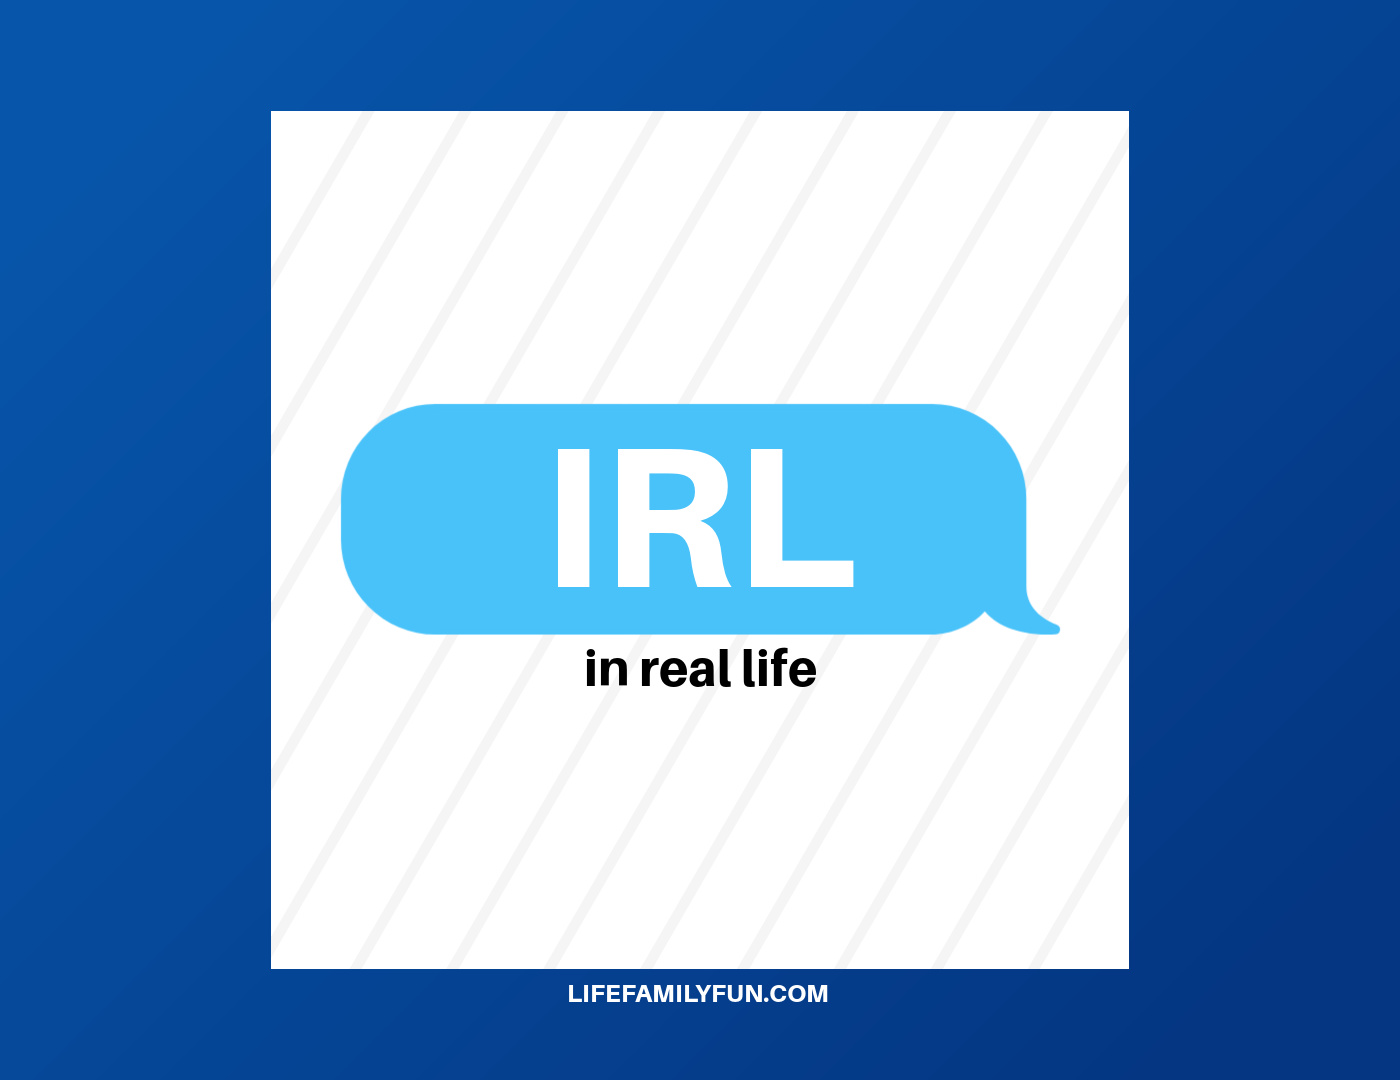 What does IRL mean?